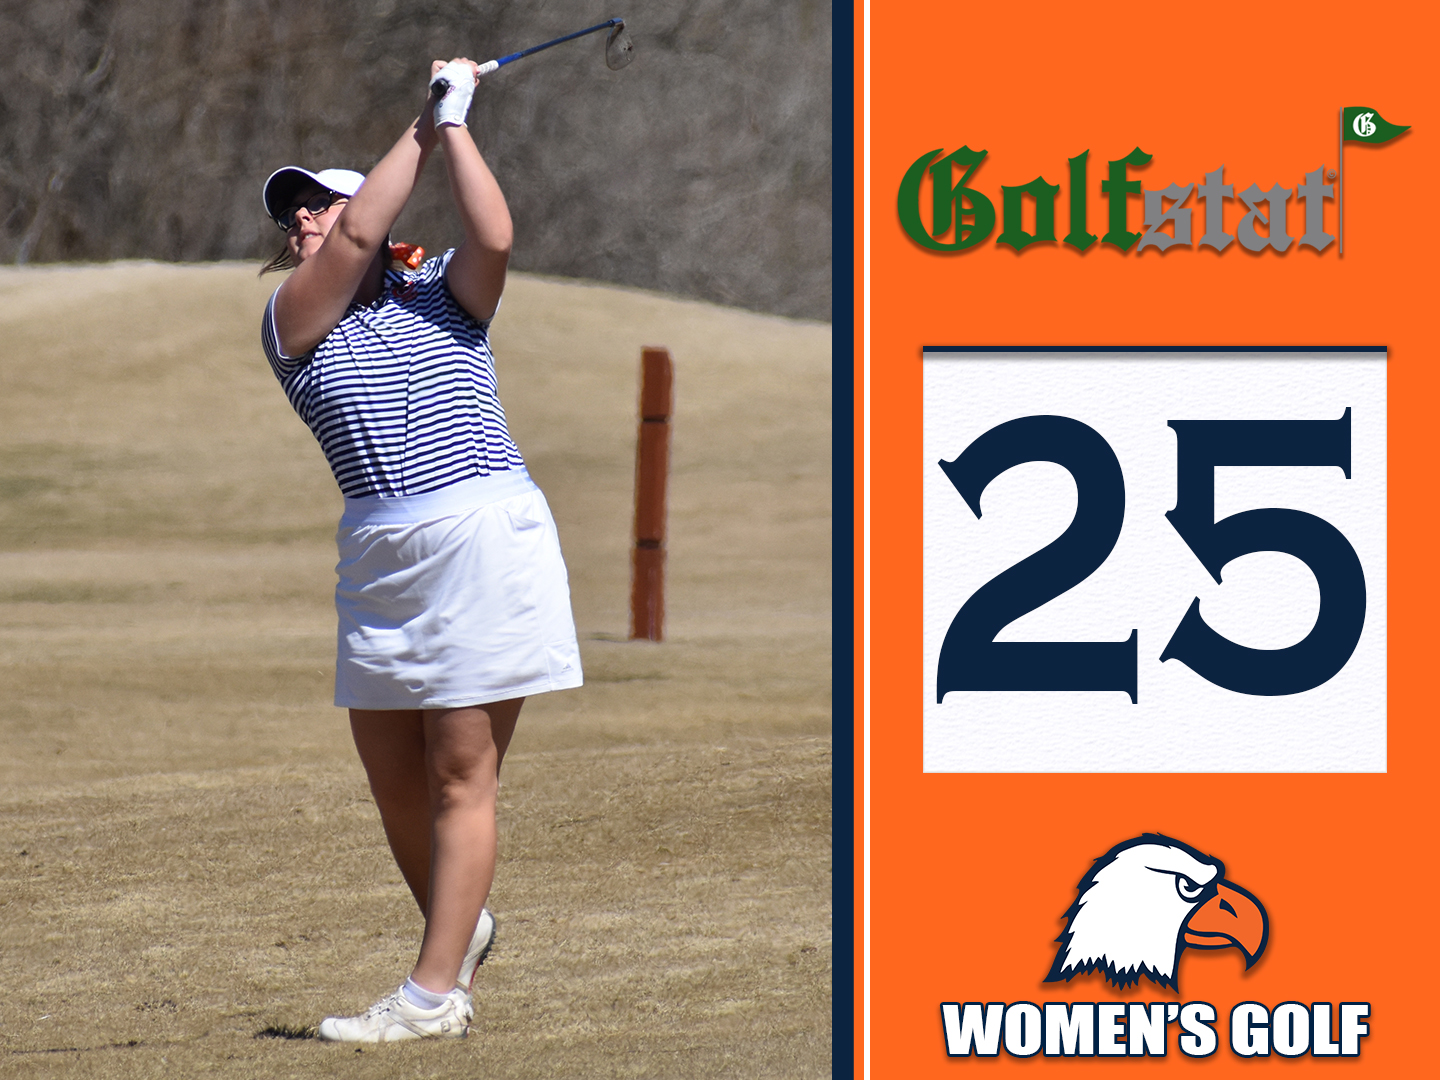 C-N climbs back into Golfstat's Top 25